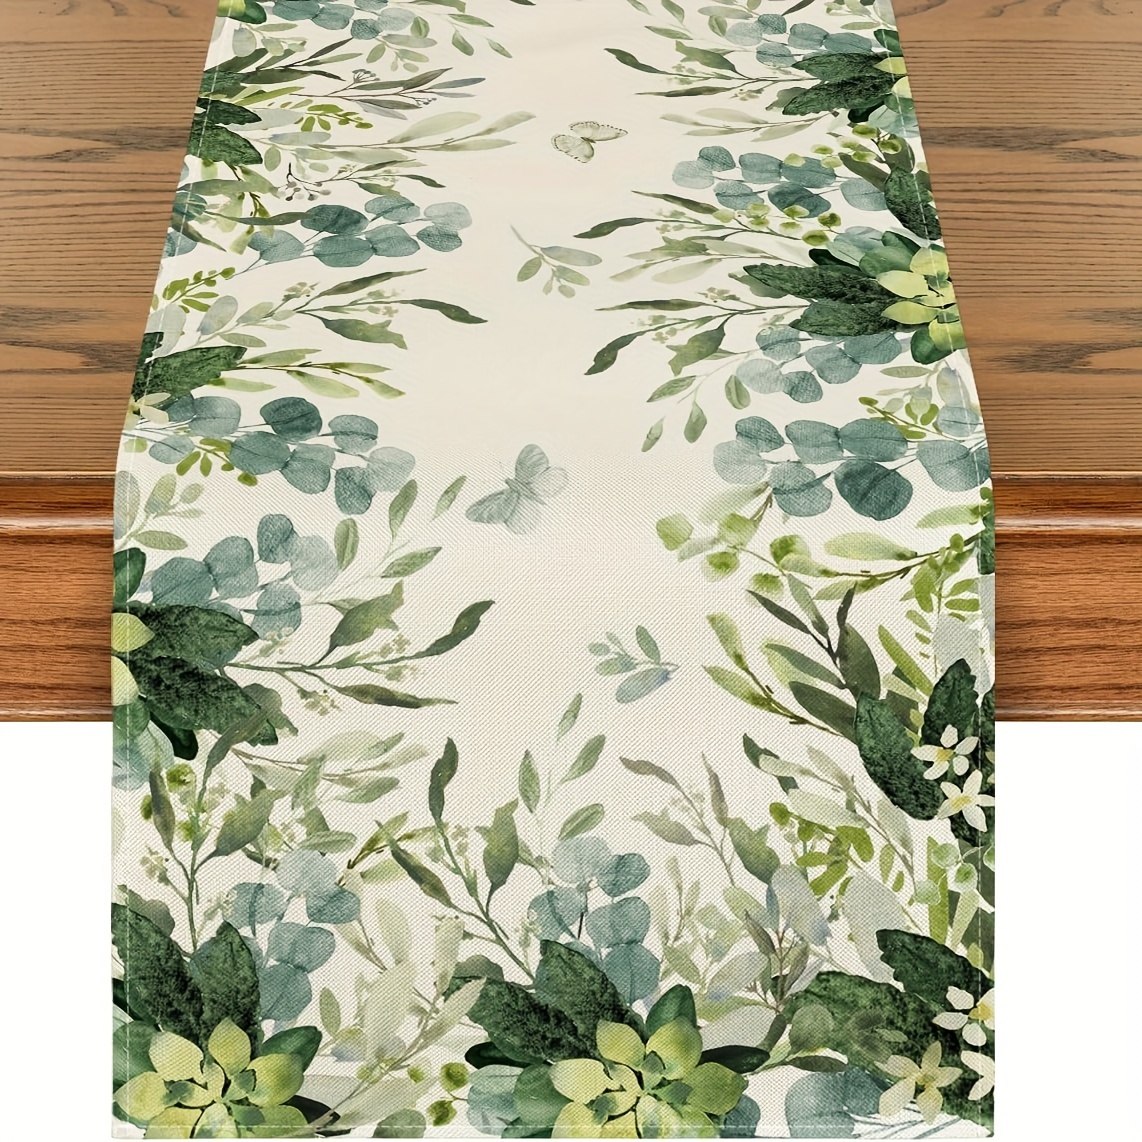 

1pc Linen Table Runner, Green Flowers And Eucalyptus Design, Spring Theme Home Party Table Decor, Seasonal Kitchen Dining Table Decoration